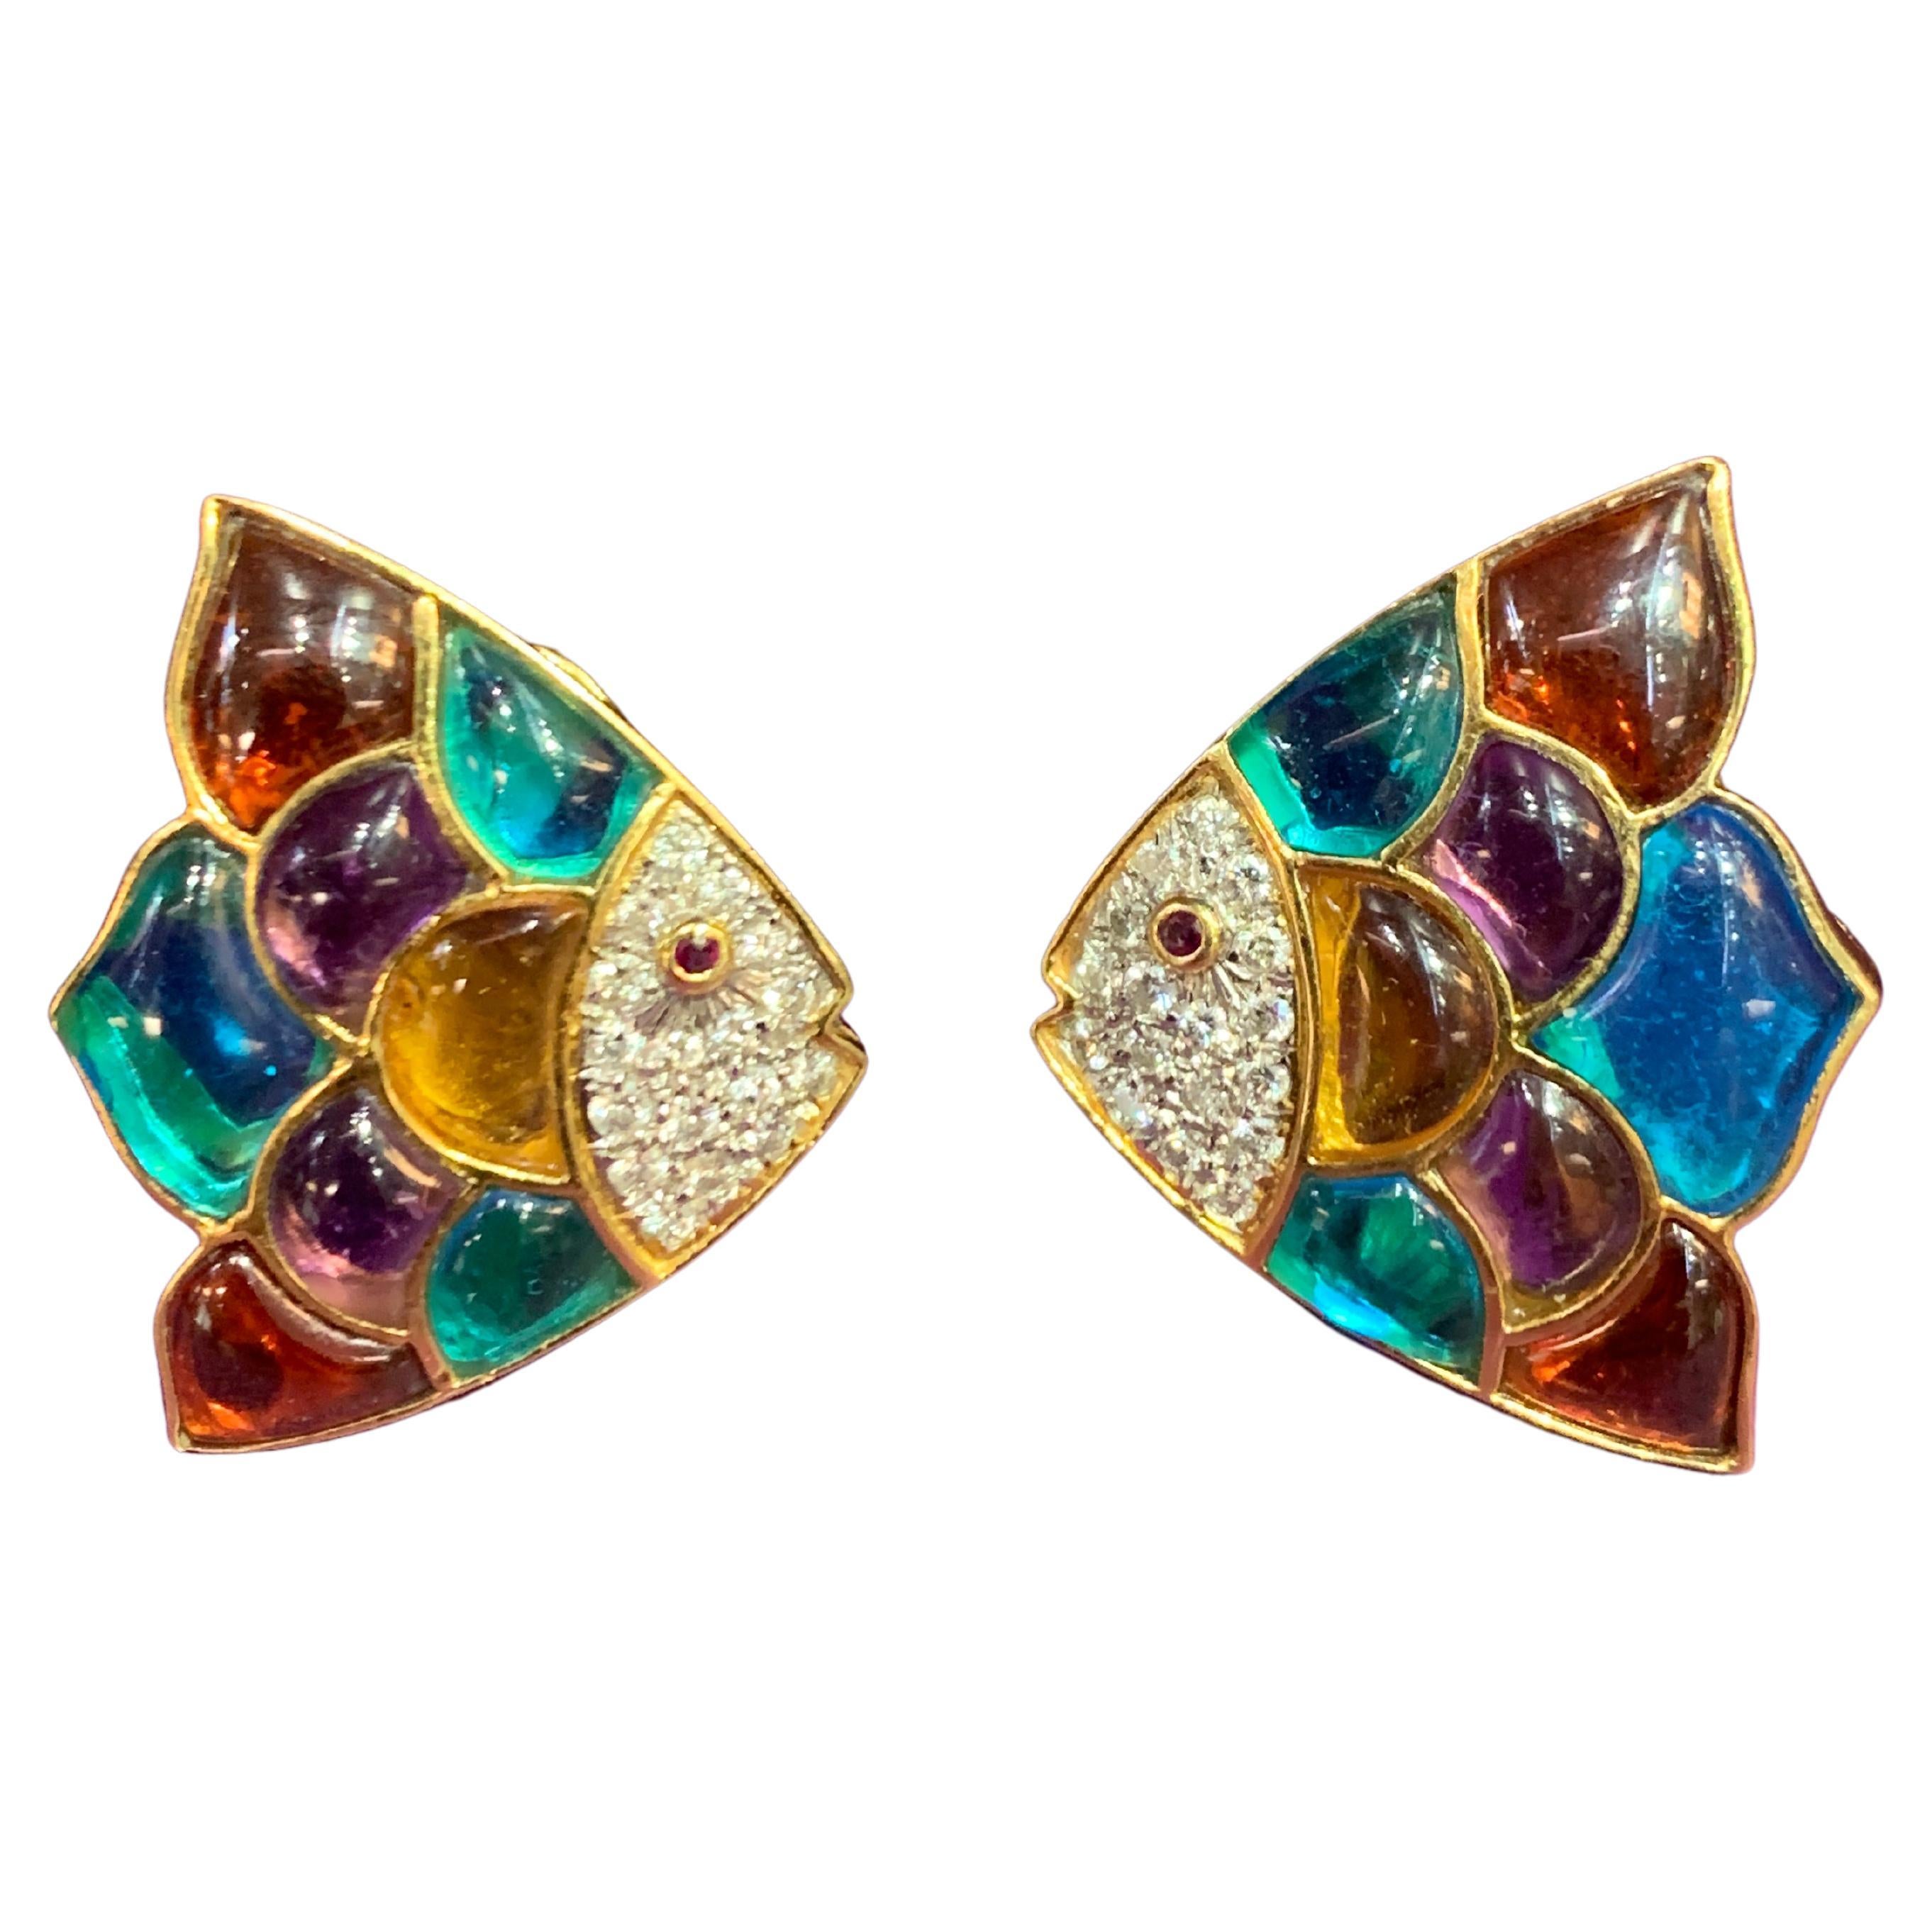 Multi Gem & Diamond Fish Earrings, including  round cut cut diamonds & cabochon multi gems, citrine blue topaz & amethyst all set in 18k yellow gold.

Back Type: Clip On with Post 

Measurements: 1 inch long 

